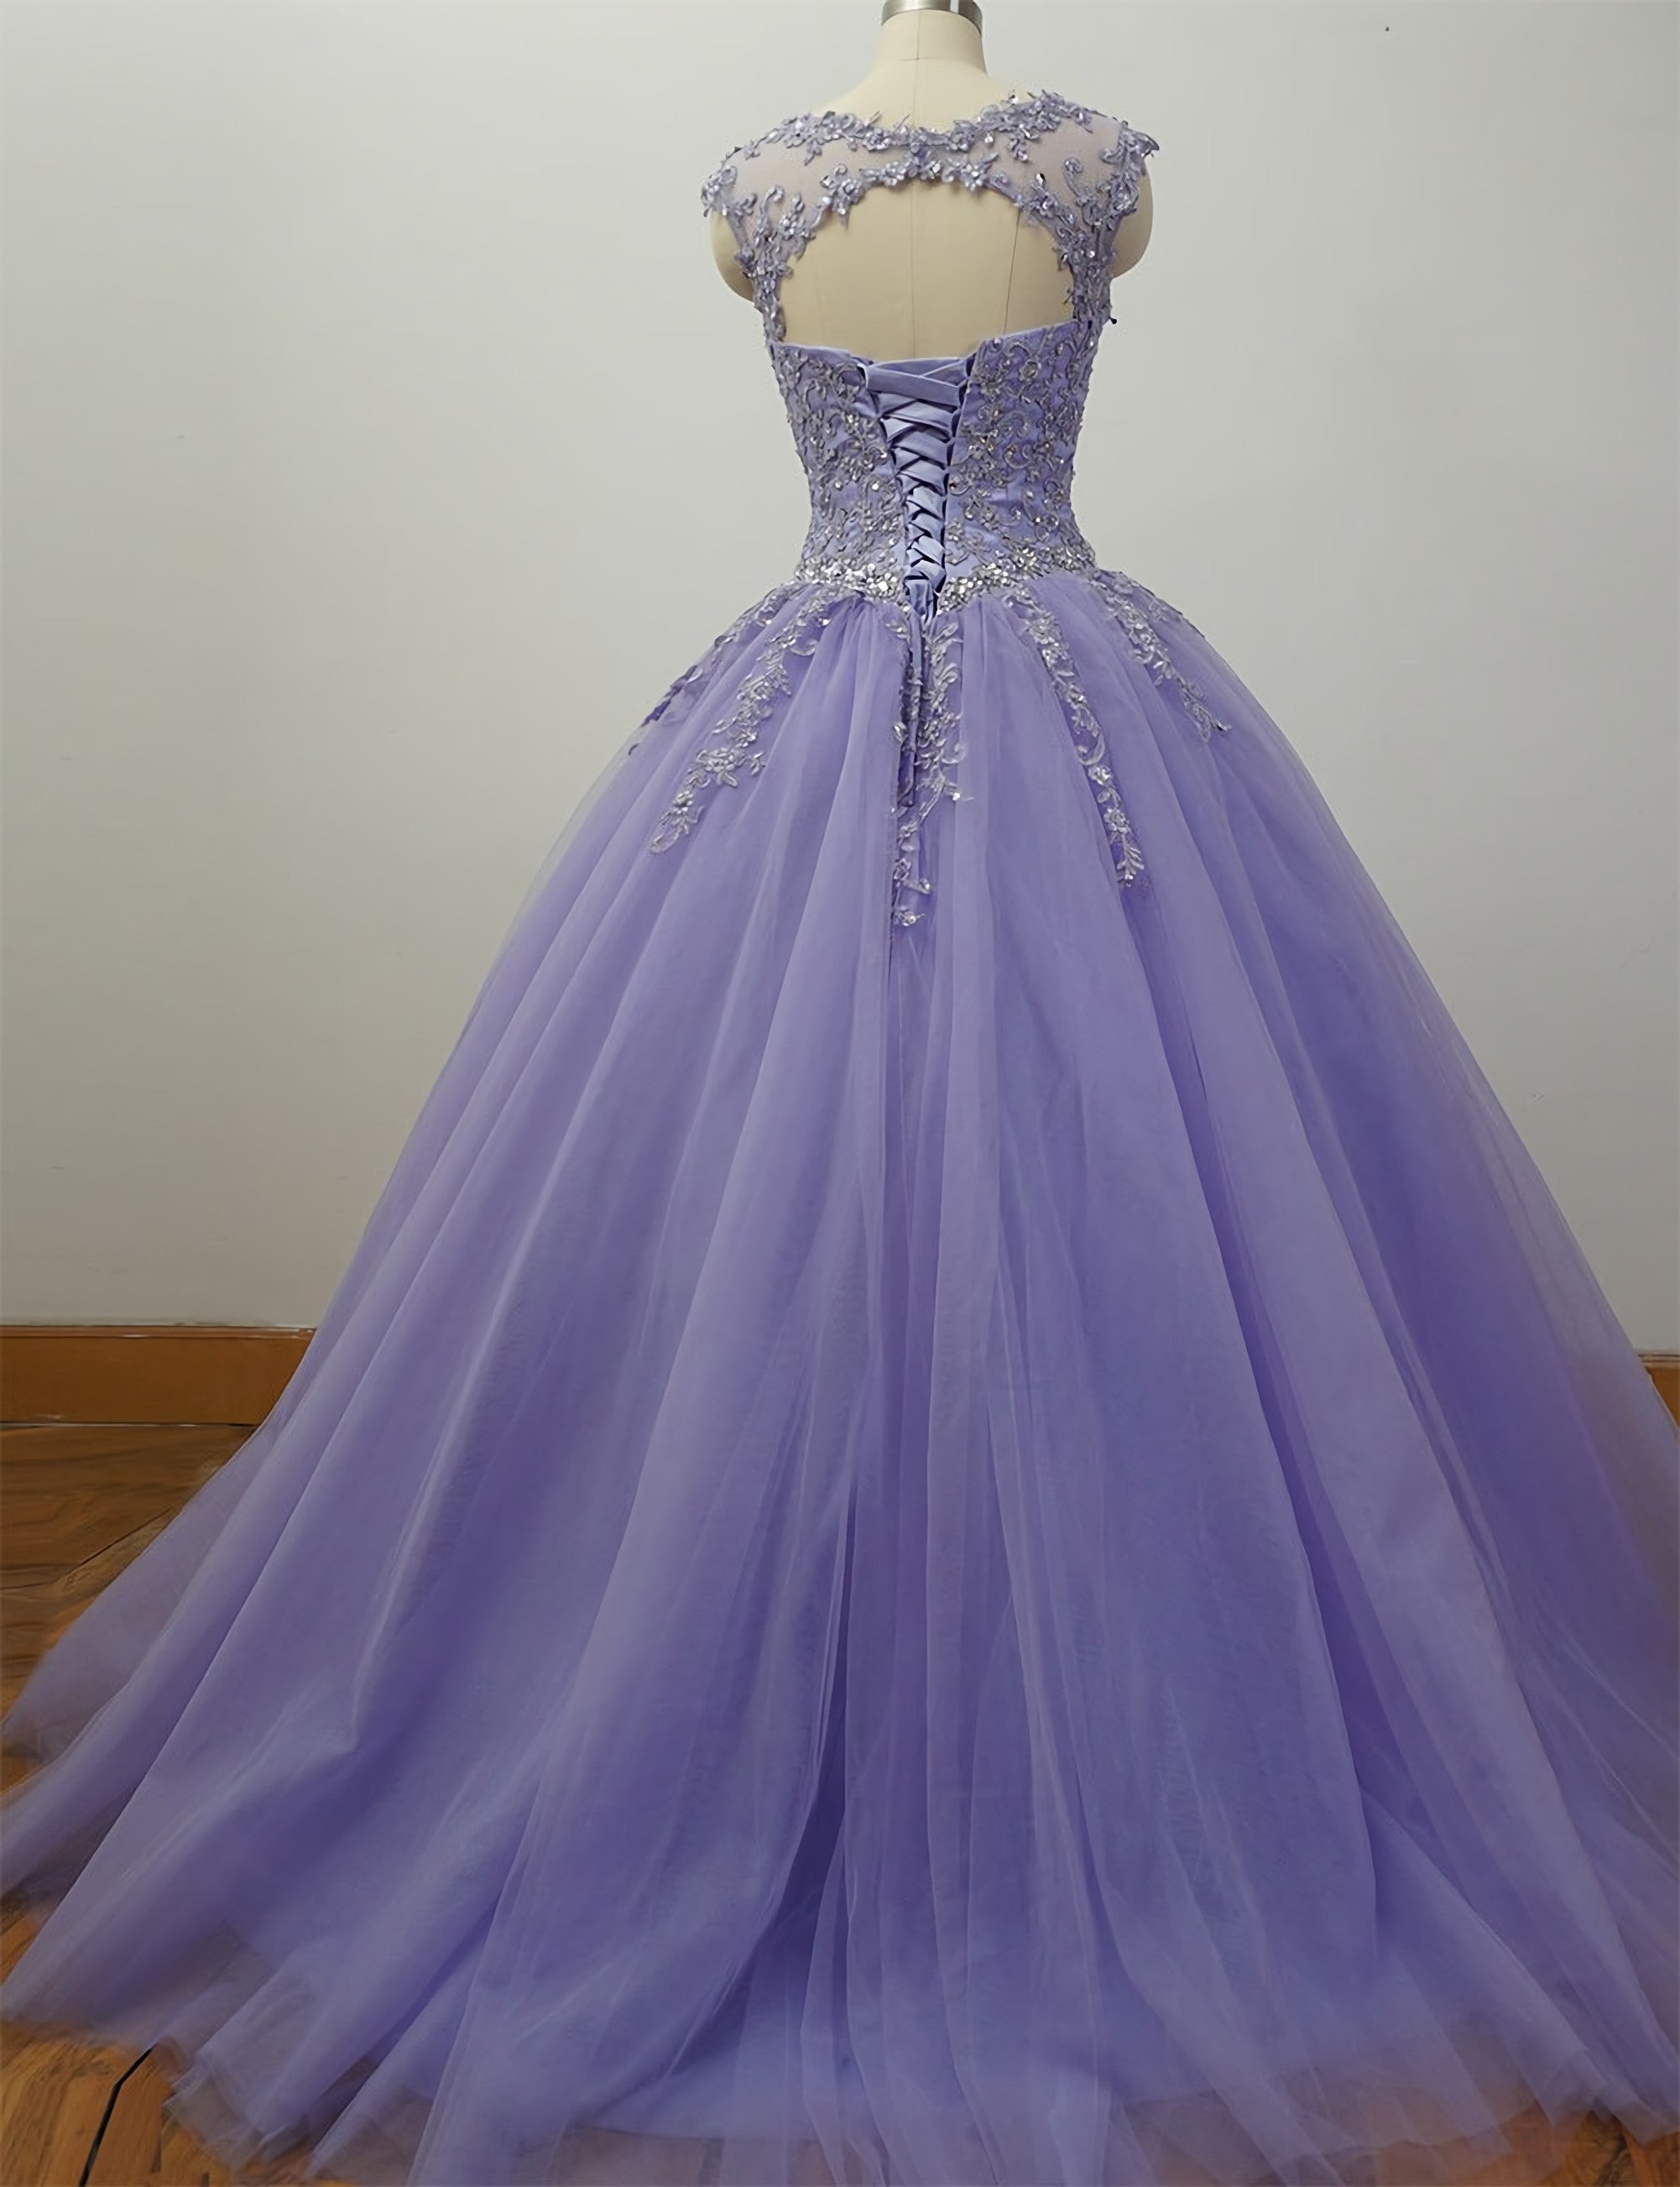 Prom Dresses Piece, Gorgeous Cap Sleeves Lavender Ball Gown Quinceanera Dresses, Lace Appliqued Beading Bling Bling Sweet 16 Dress, Debutante Gown Prom Dresses